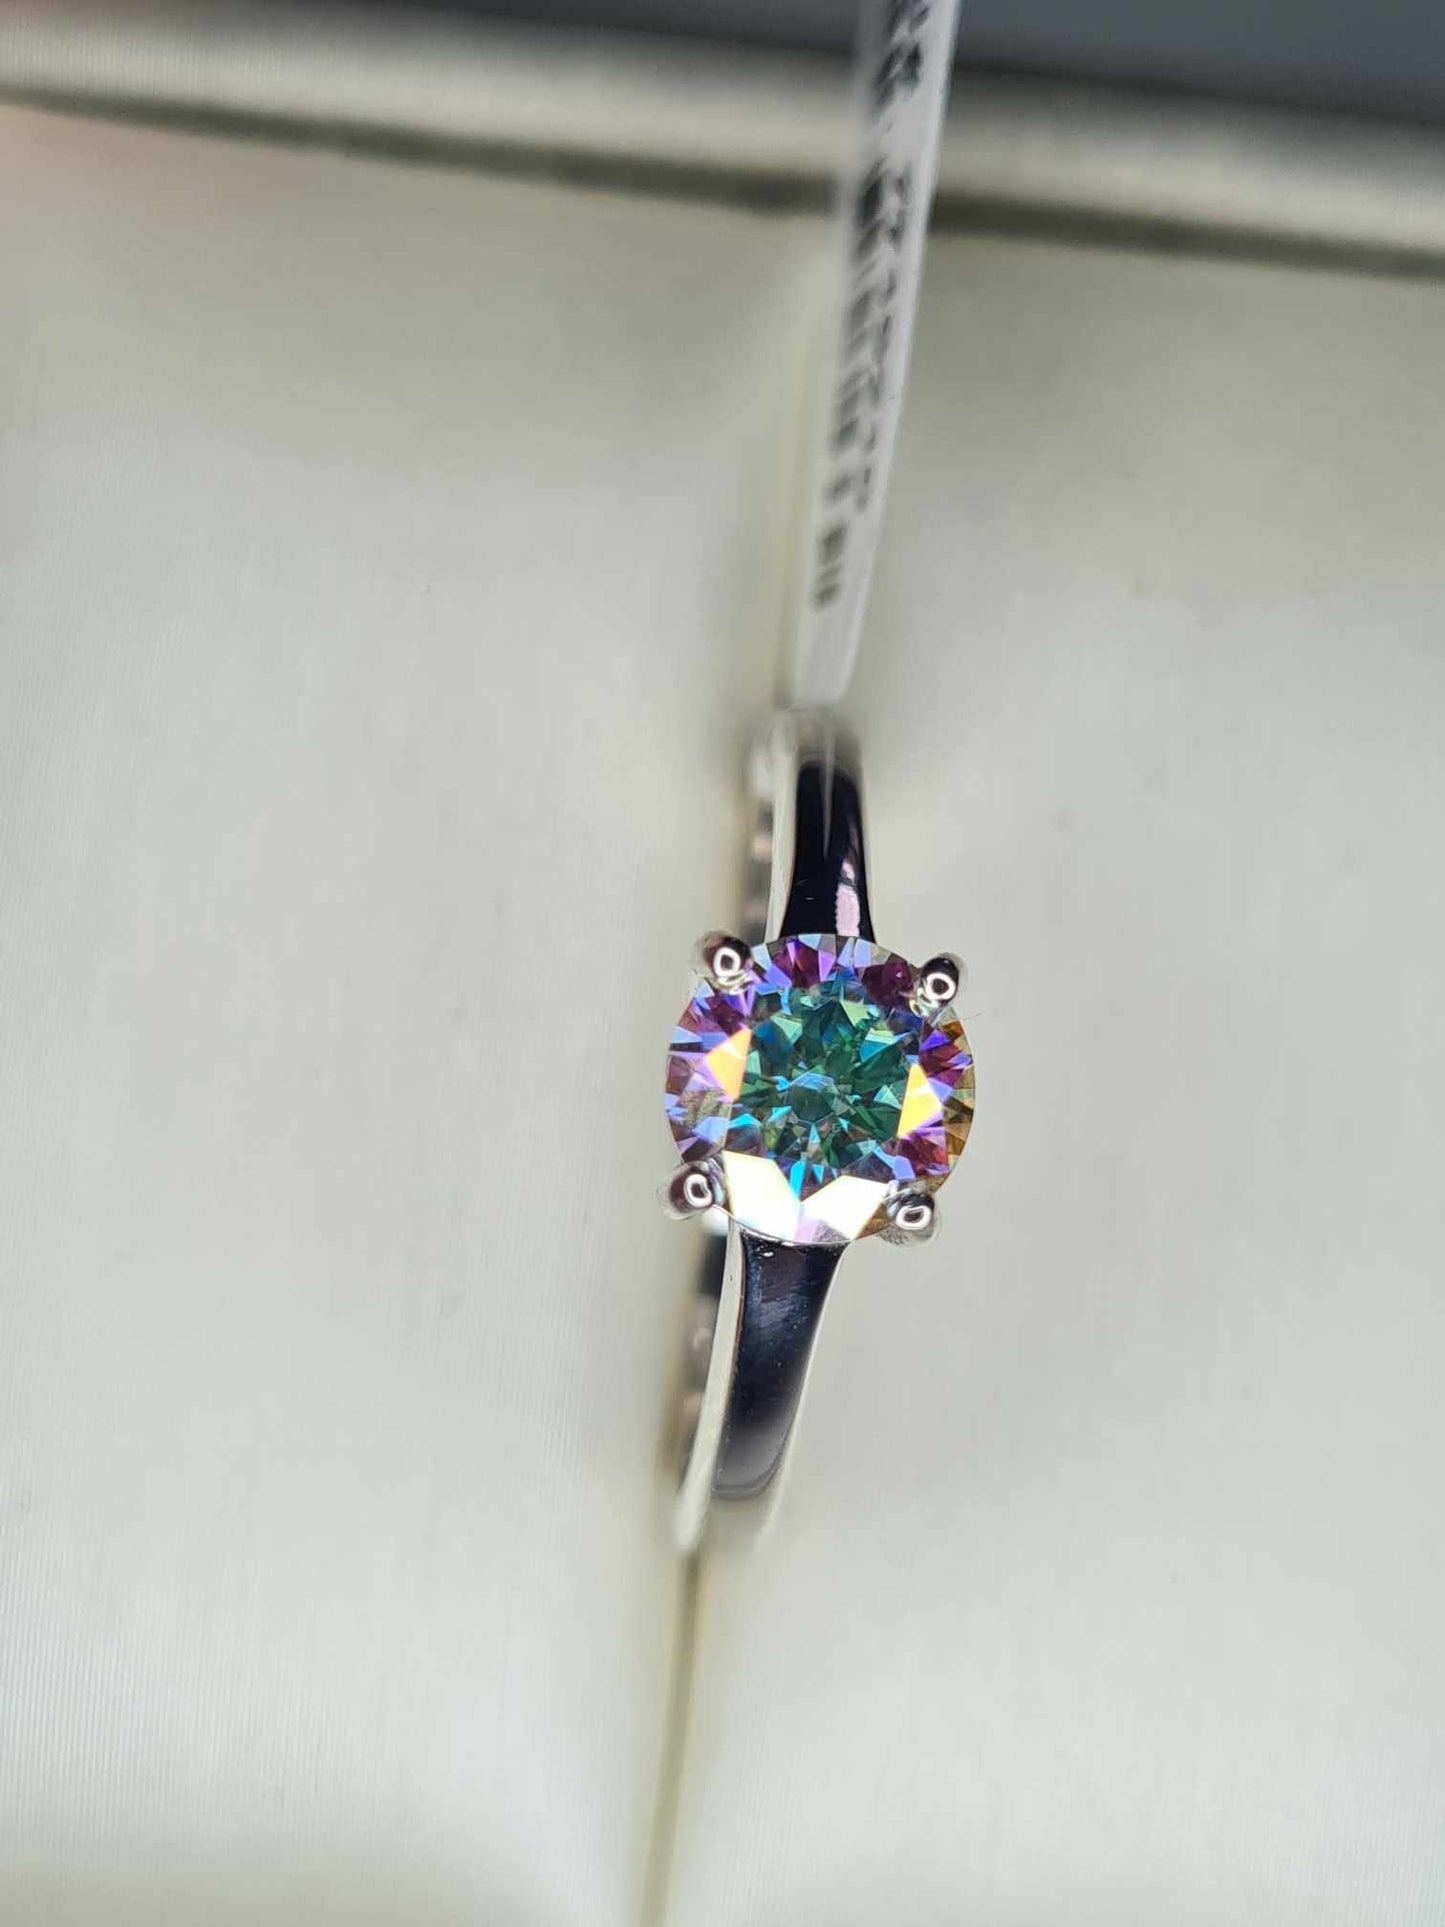 1ct  Light Rainbow Moissanite Solitaire Ring in Rhodium Overlay Sterling Silver SIZES N,O, P